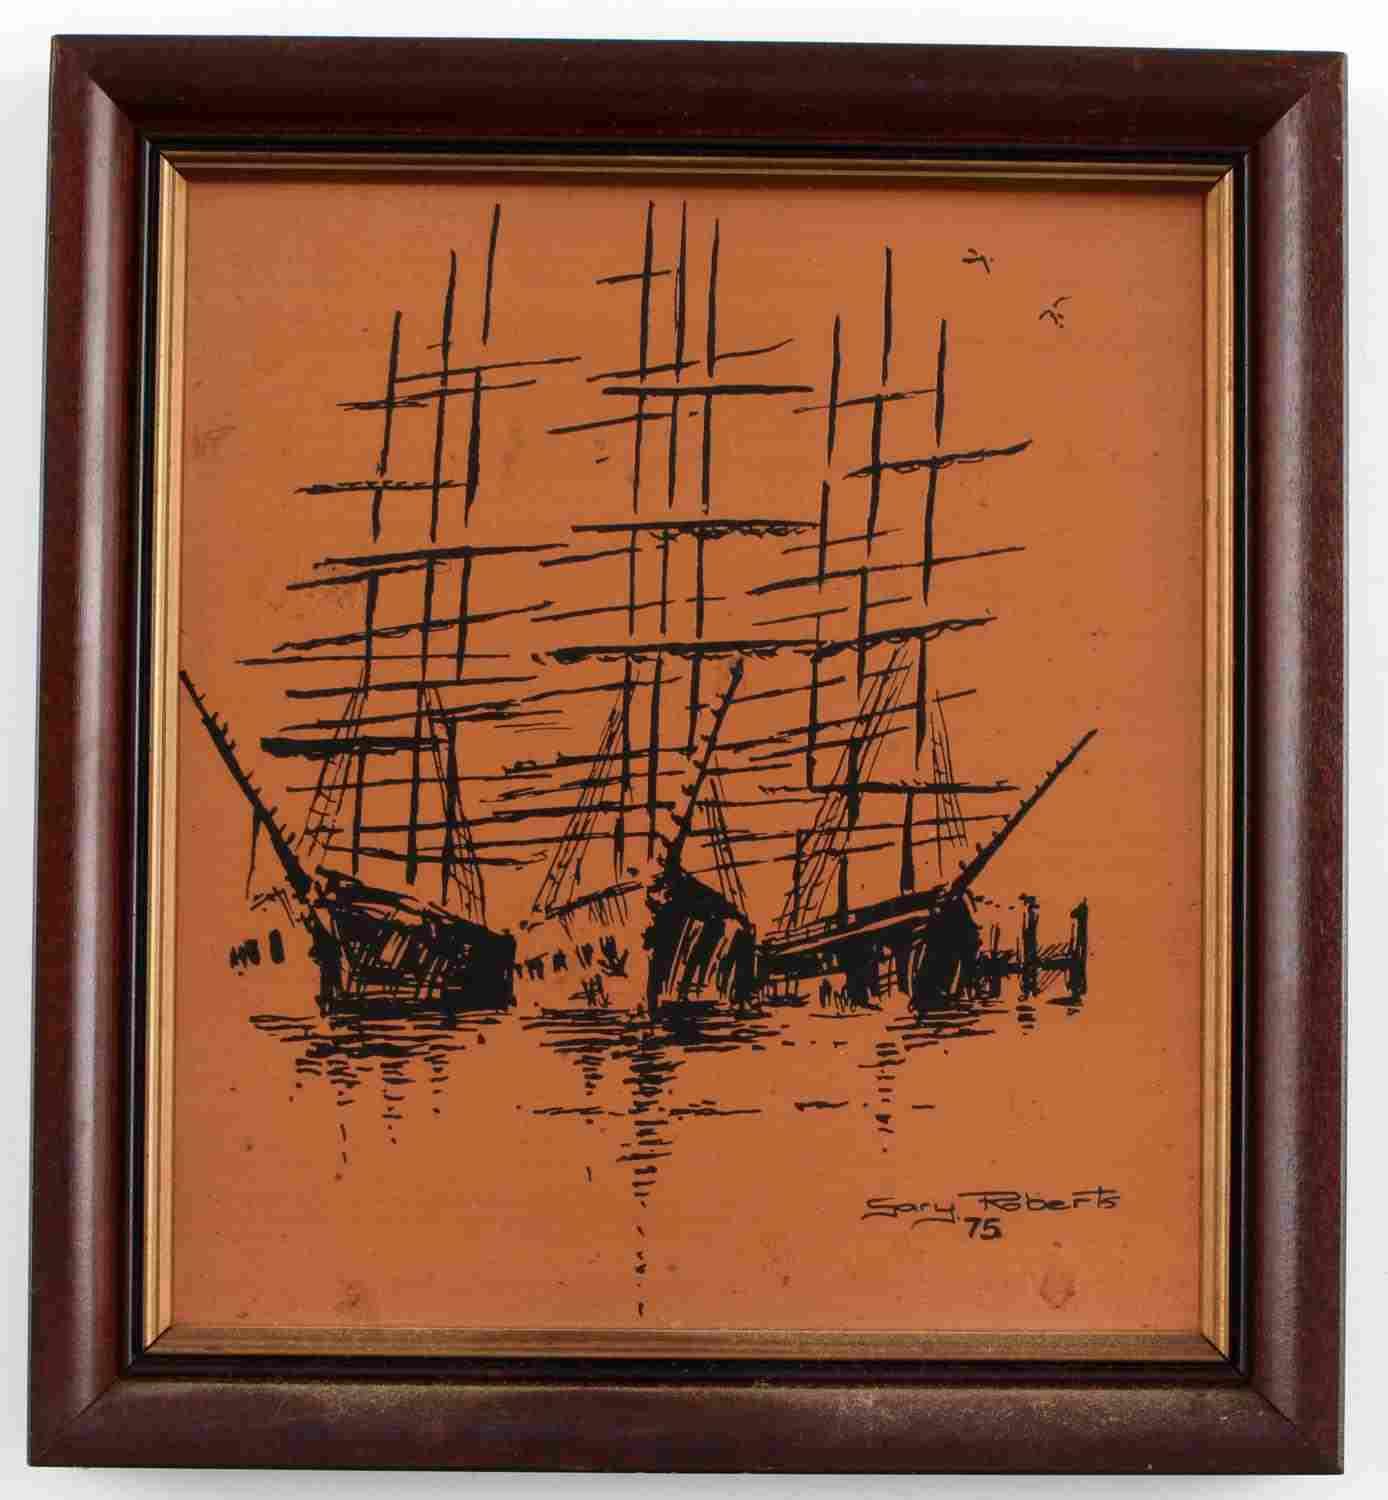 3 COPPER SHIP ETCHINGS BY GARY ROBERTS 1975